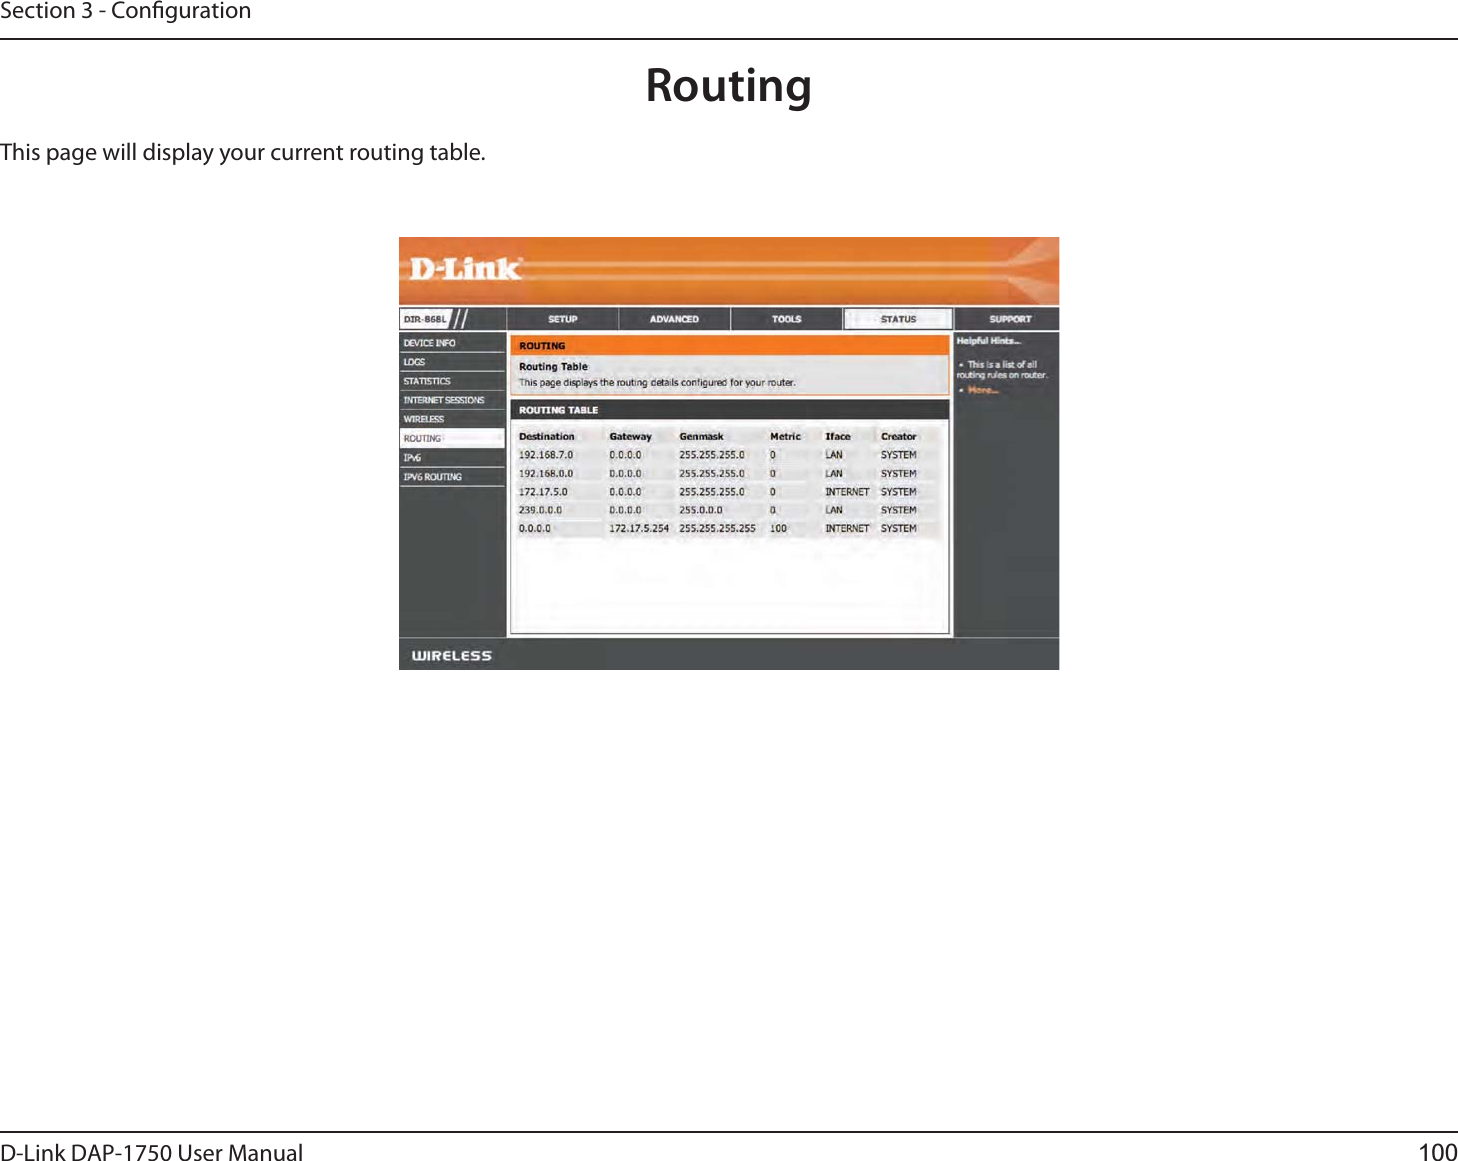 D-Link %&quot;1 User ManualSection 3 - CongurationRoutingThis page will display your current routing table.100